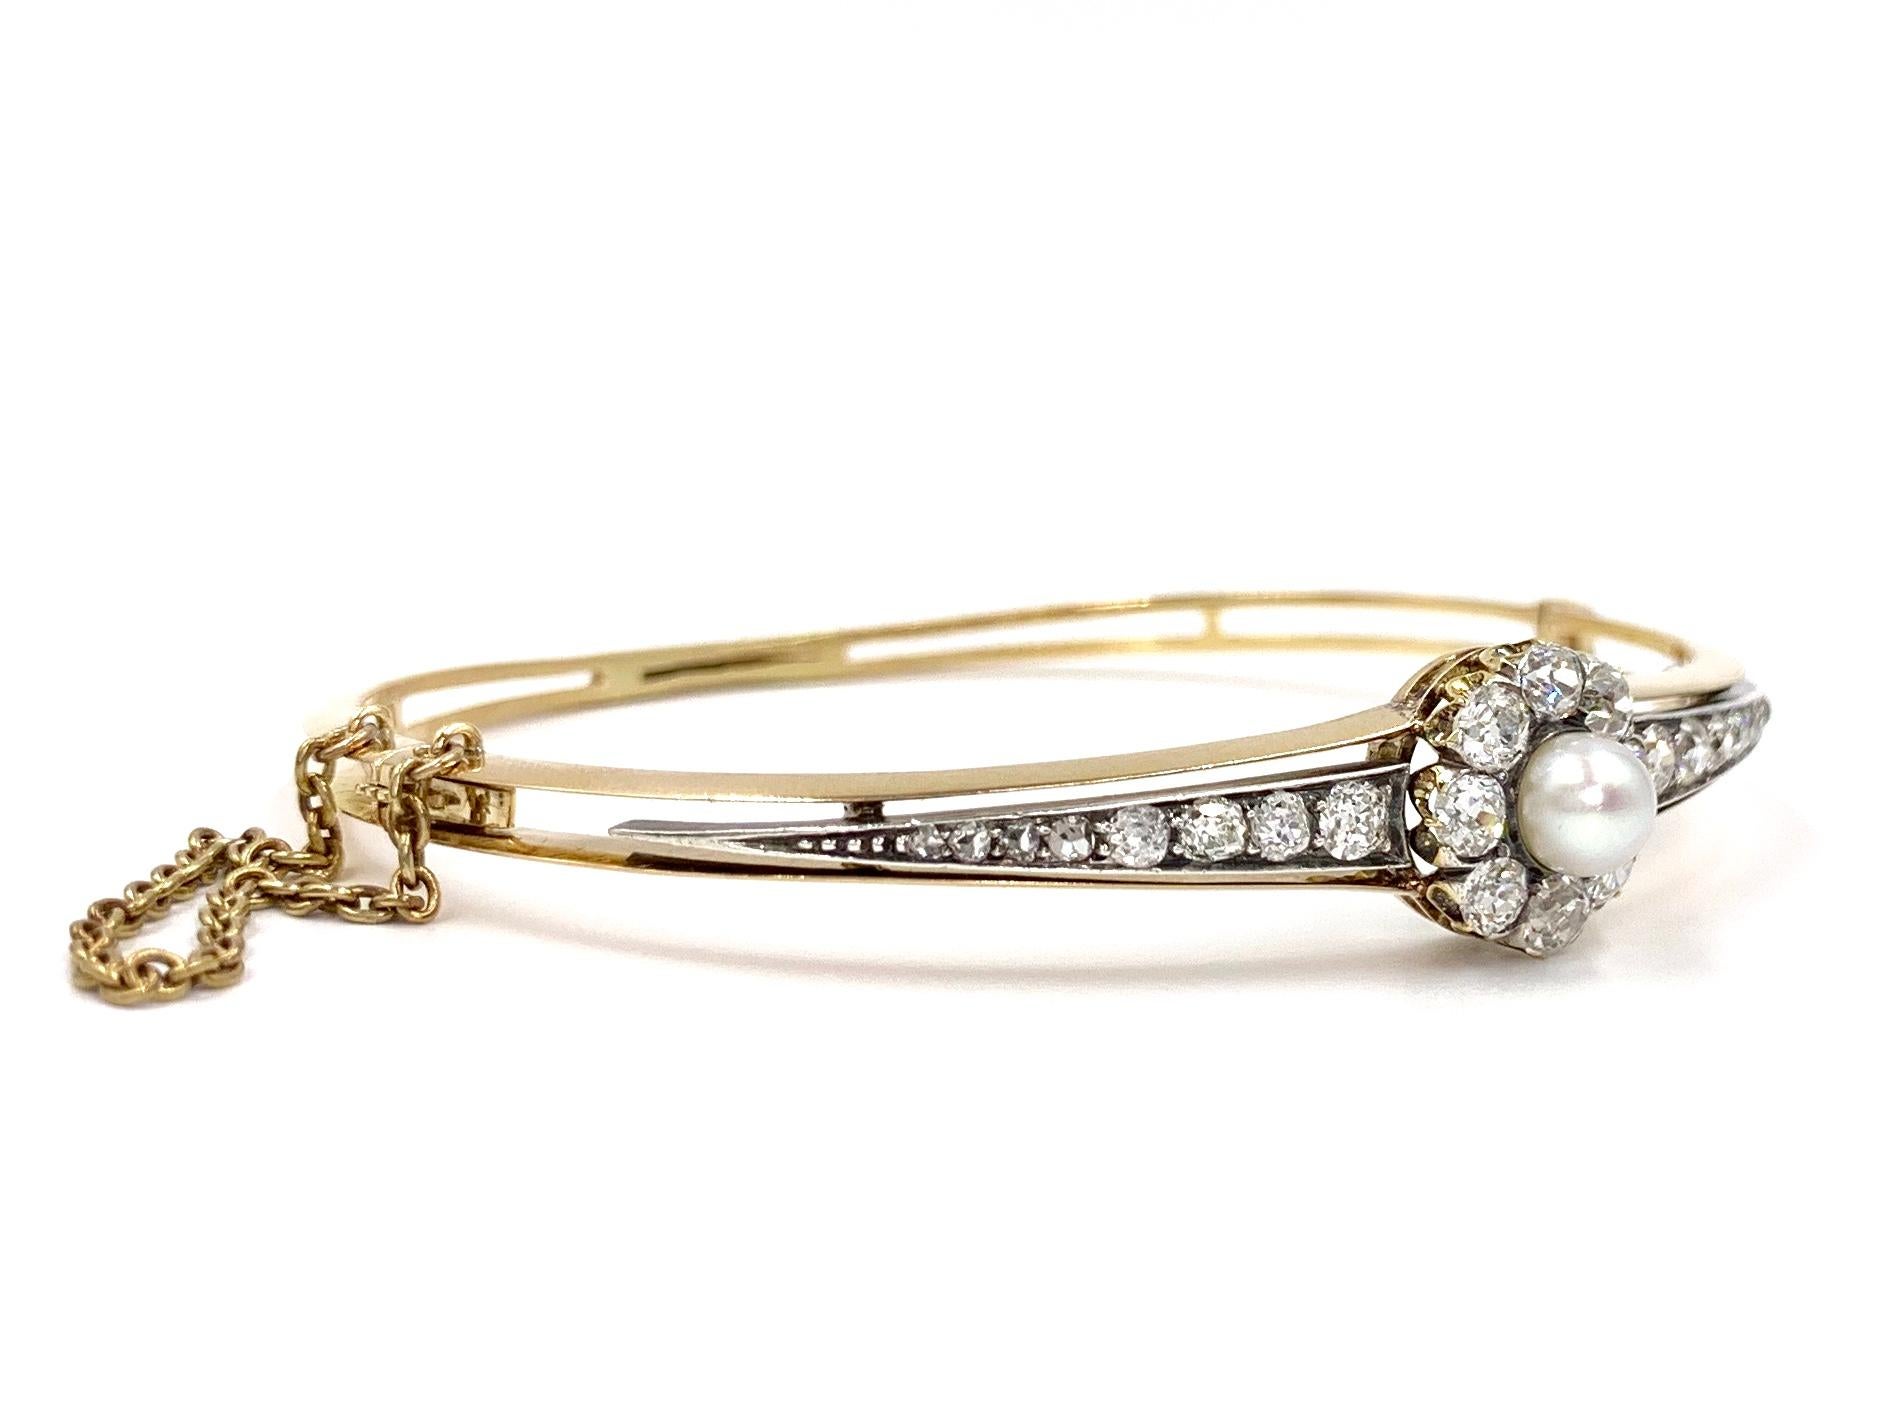 Circa 1920's this beautiful and elegant 14 karat two tone bracelet features approximately 3.50 carats of old European cut diamonds and one 5.5mm lustrous cultured pearl. Diamonds are approximately G color, SI1 clarity. Flower shaped center has a